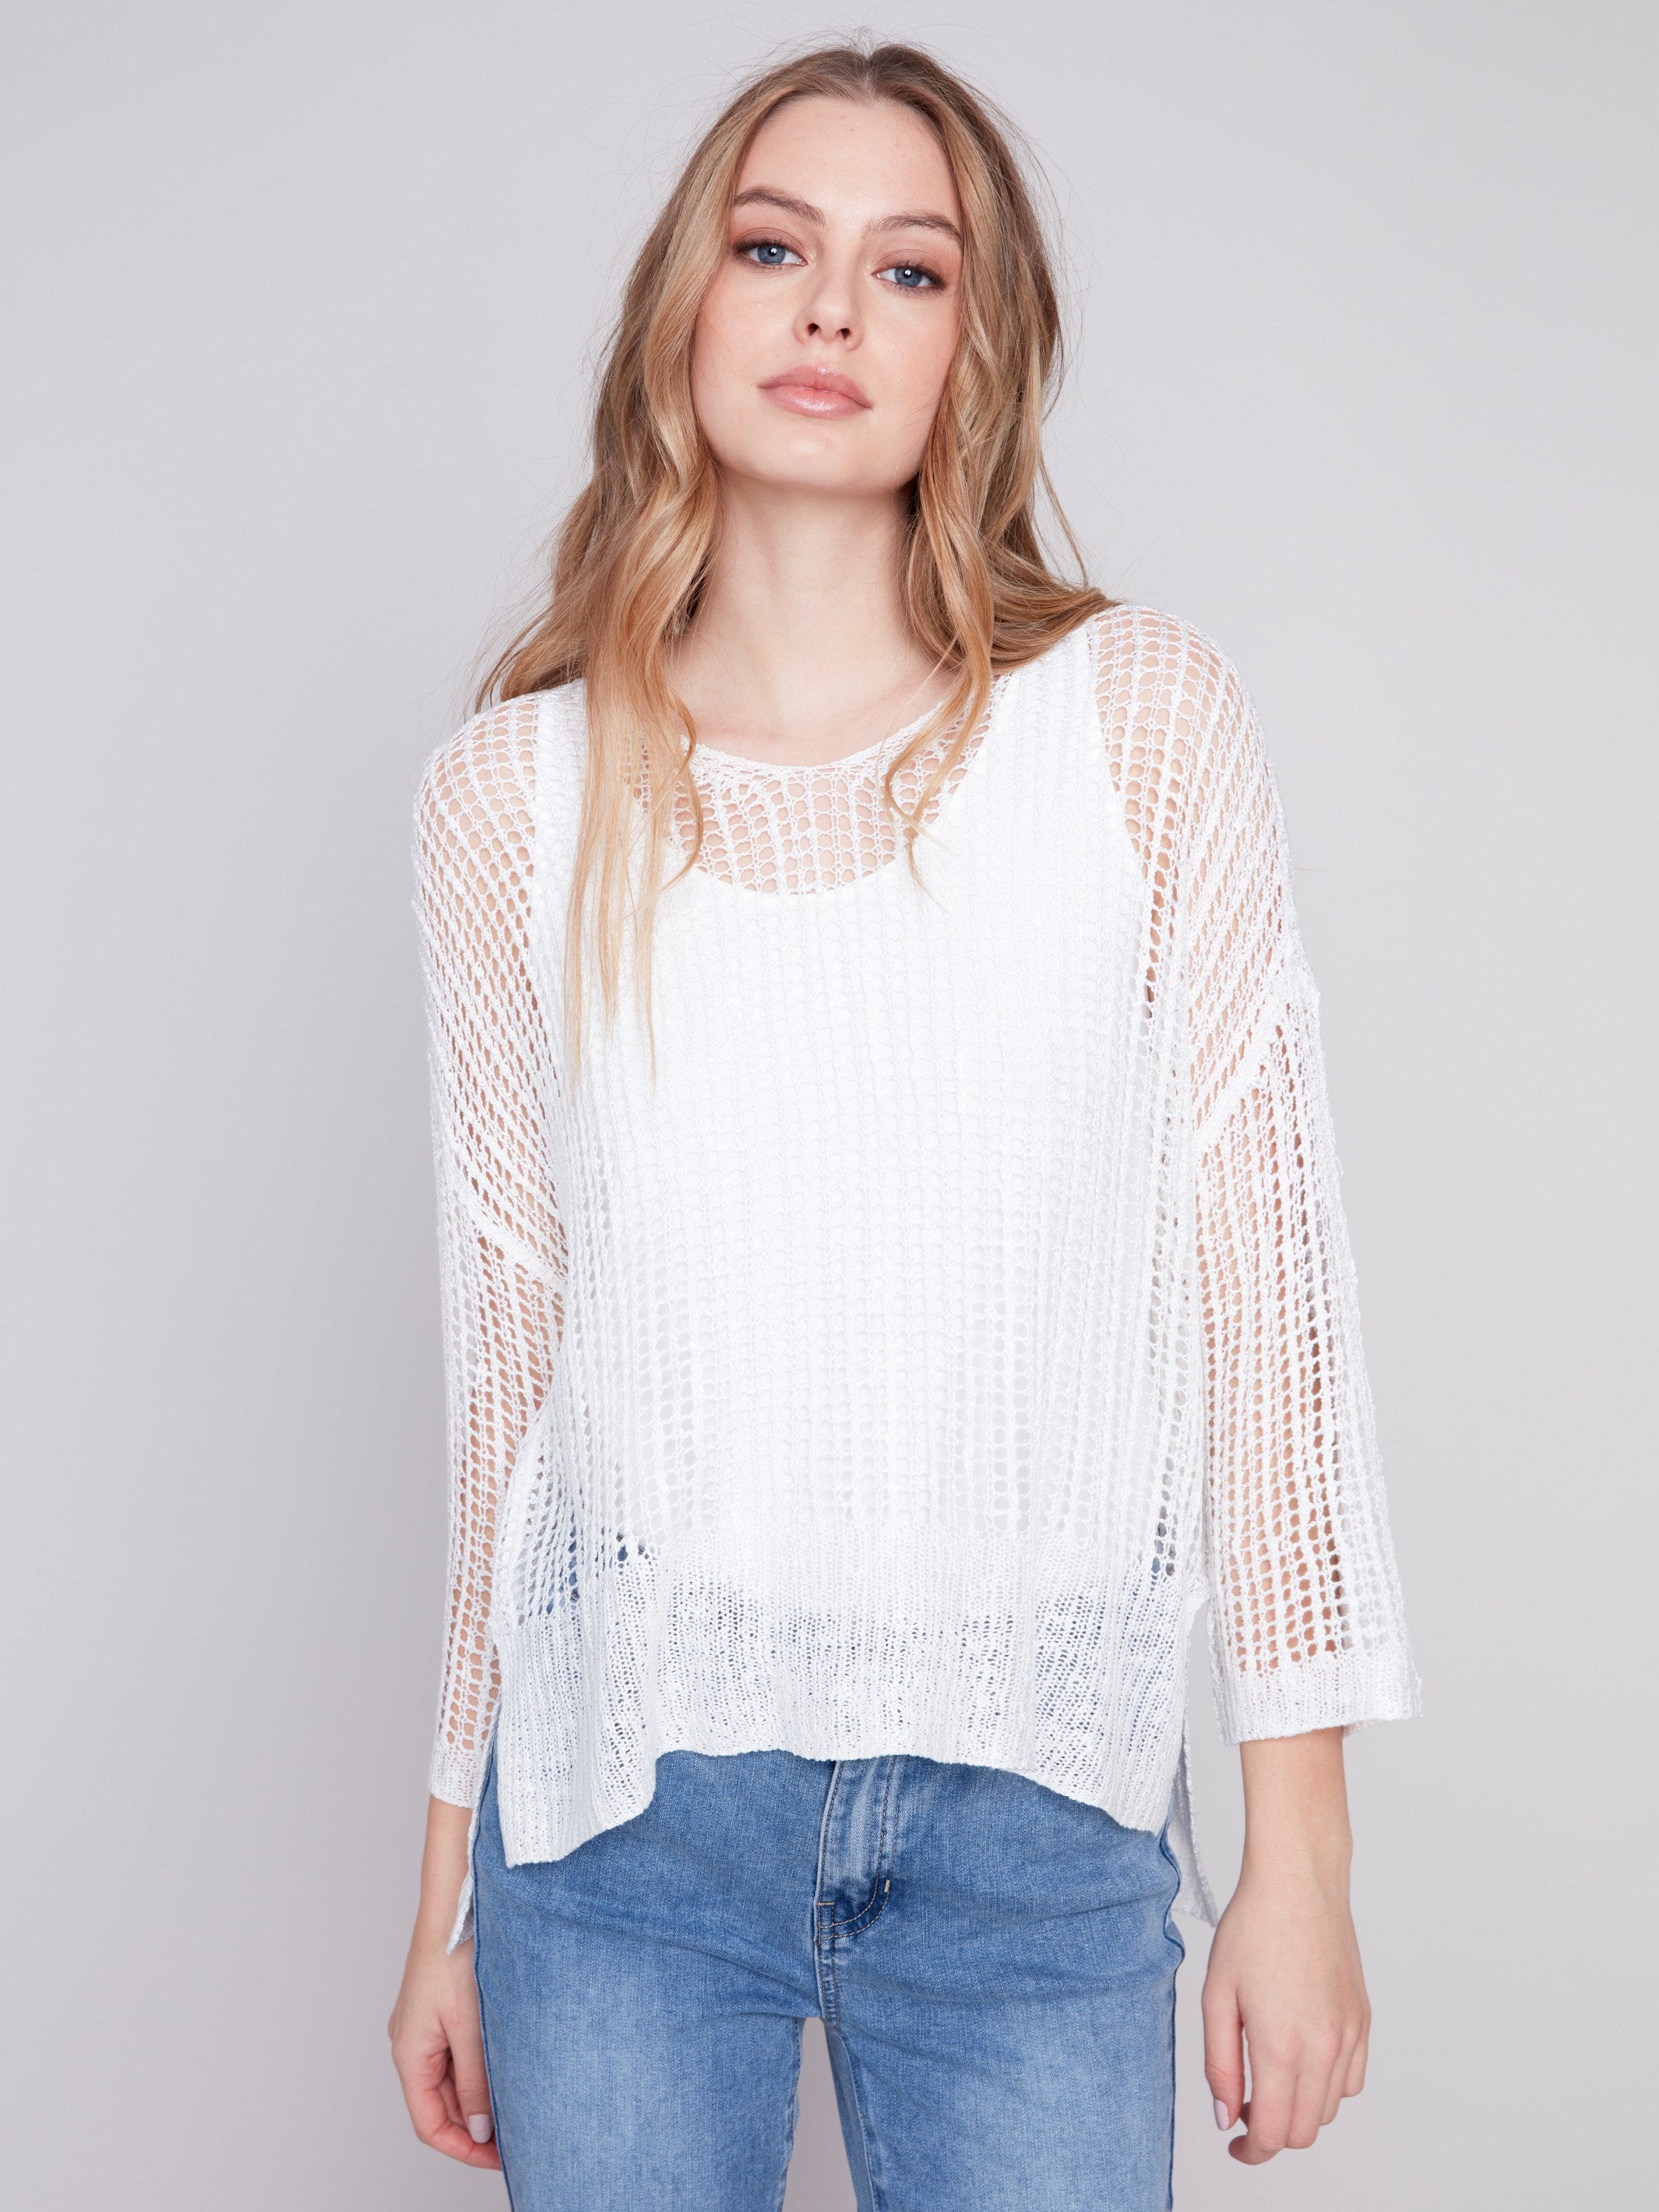 Fishnet Crochet Sweater - White - Charlie B Collection Canada - Image 1